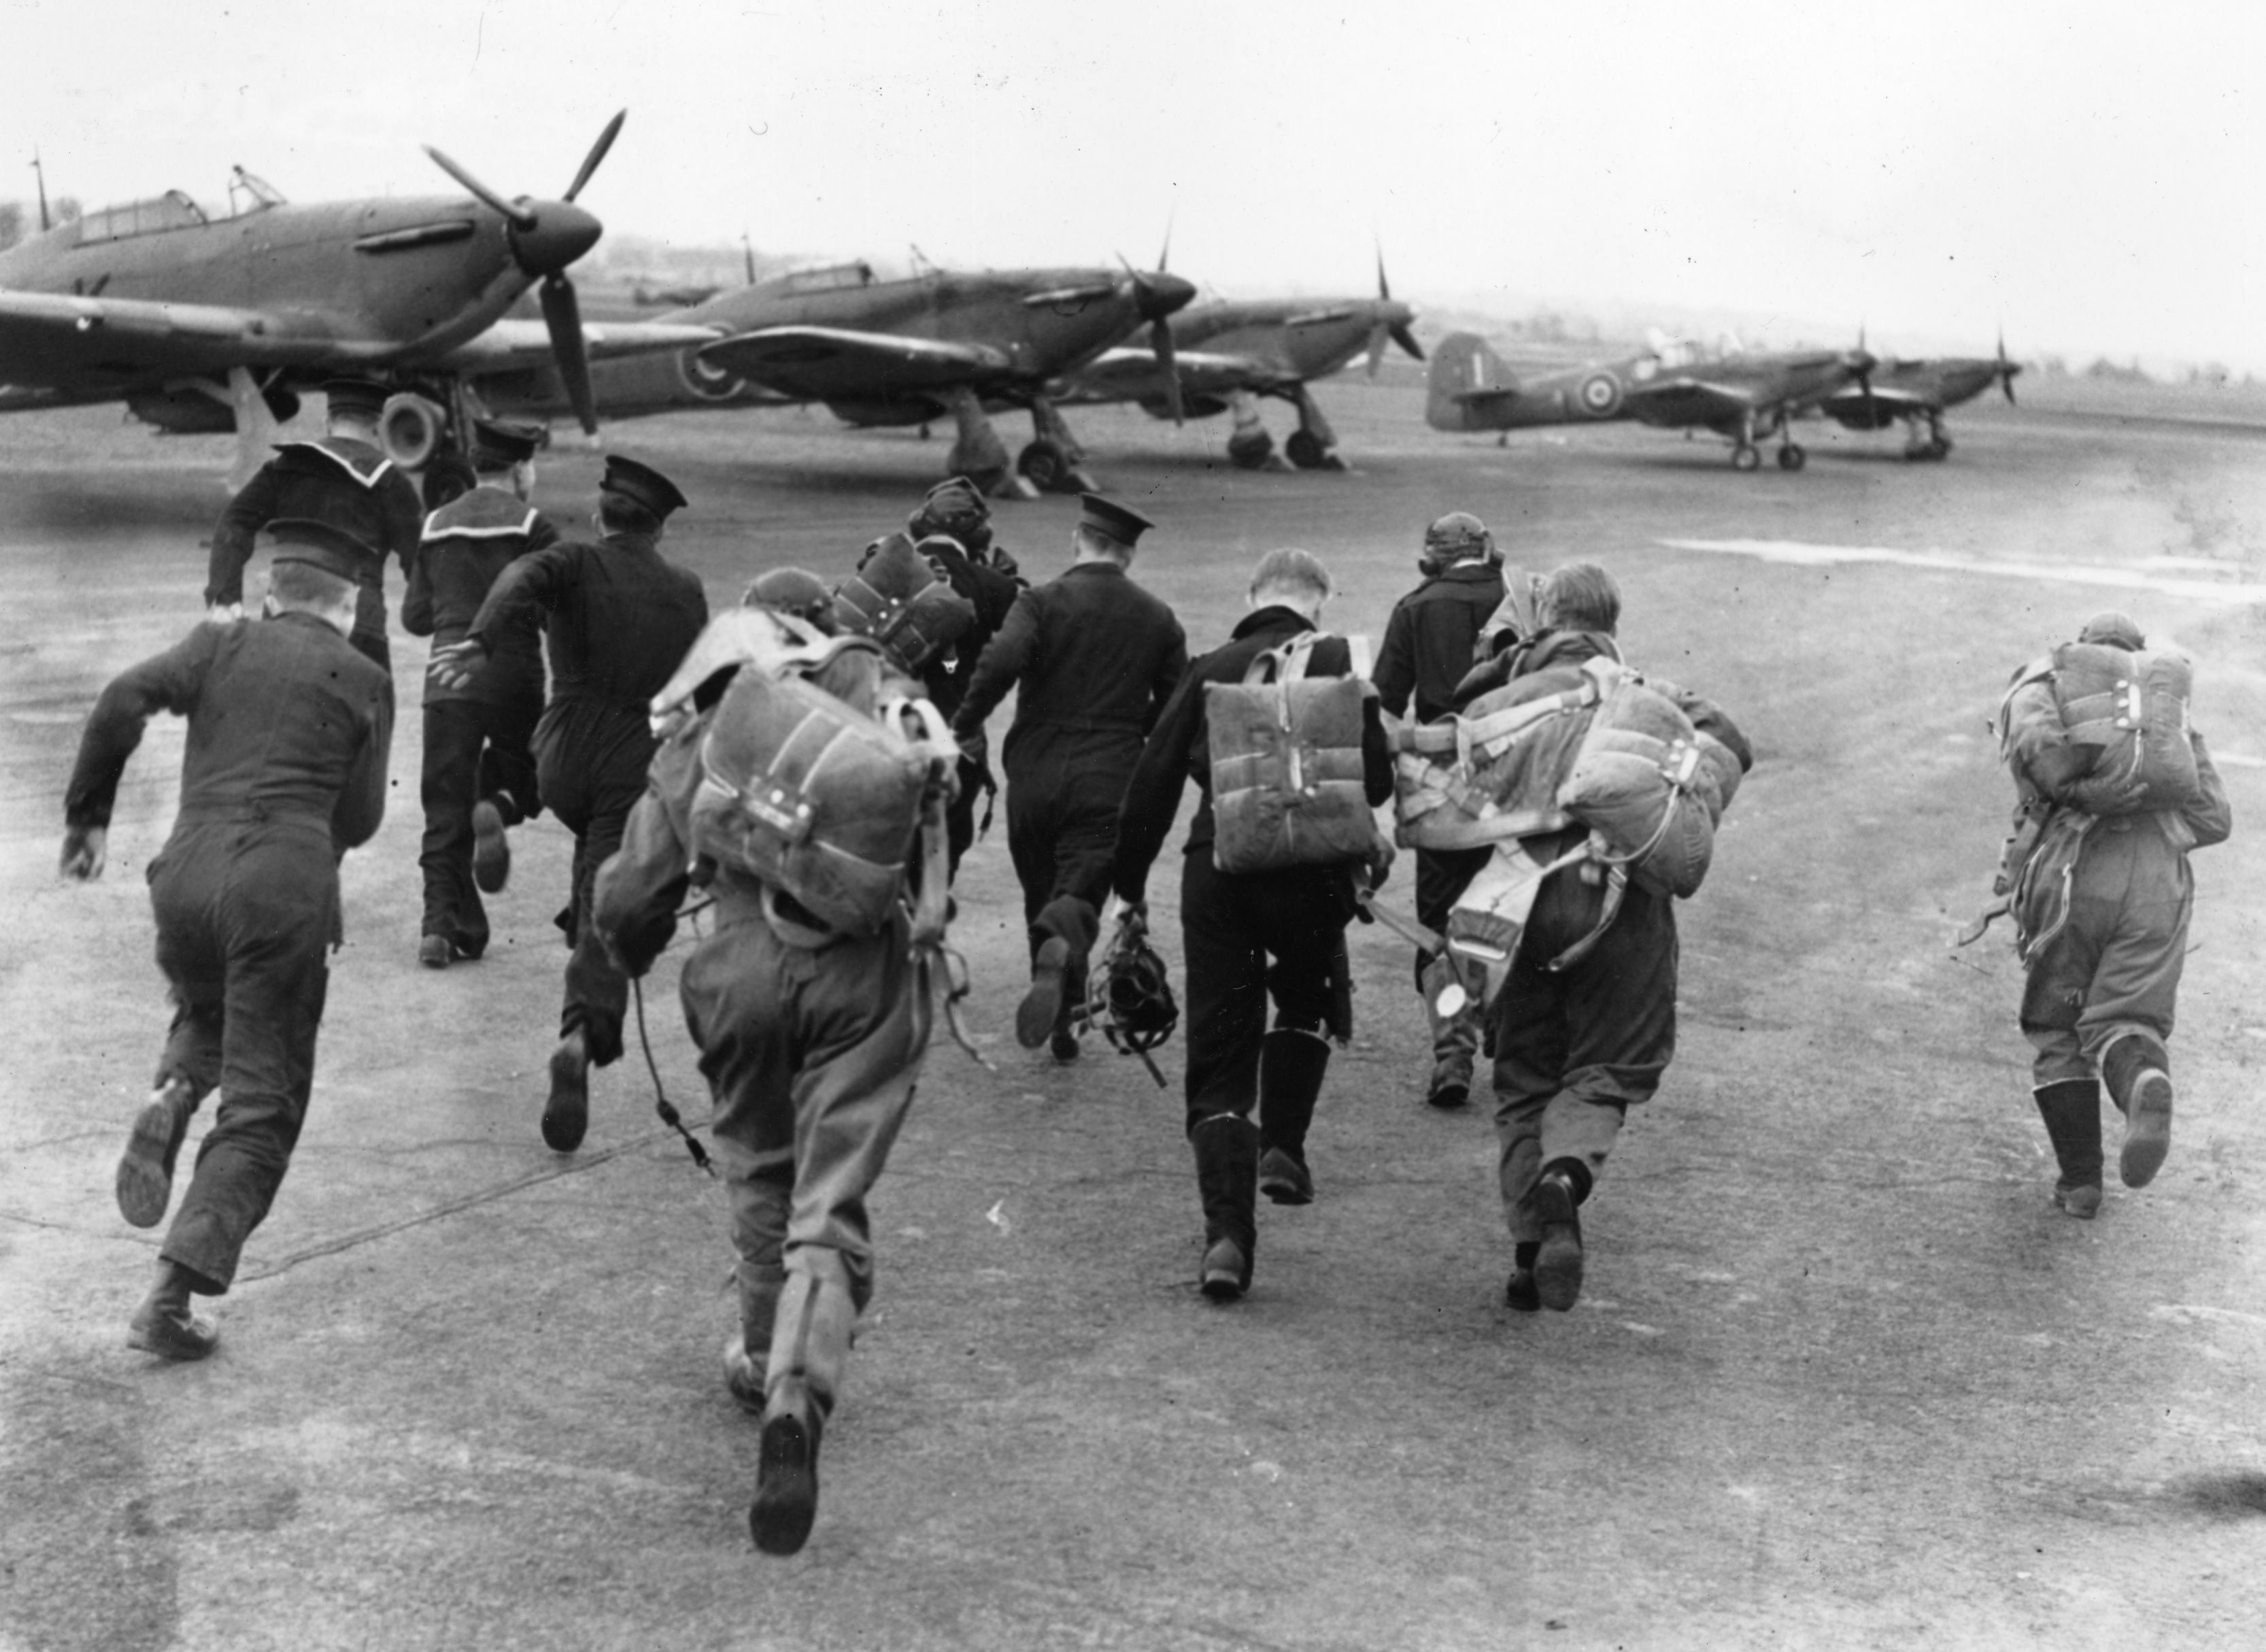 A group of RAF pilots and sailors scramble for their planes during an alert at a training centre for the Fleet Air Arm. (Photo by Keystone/Getty Images)